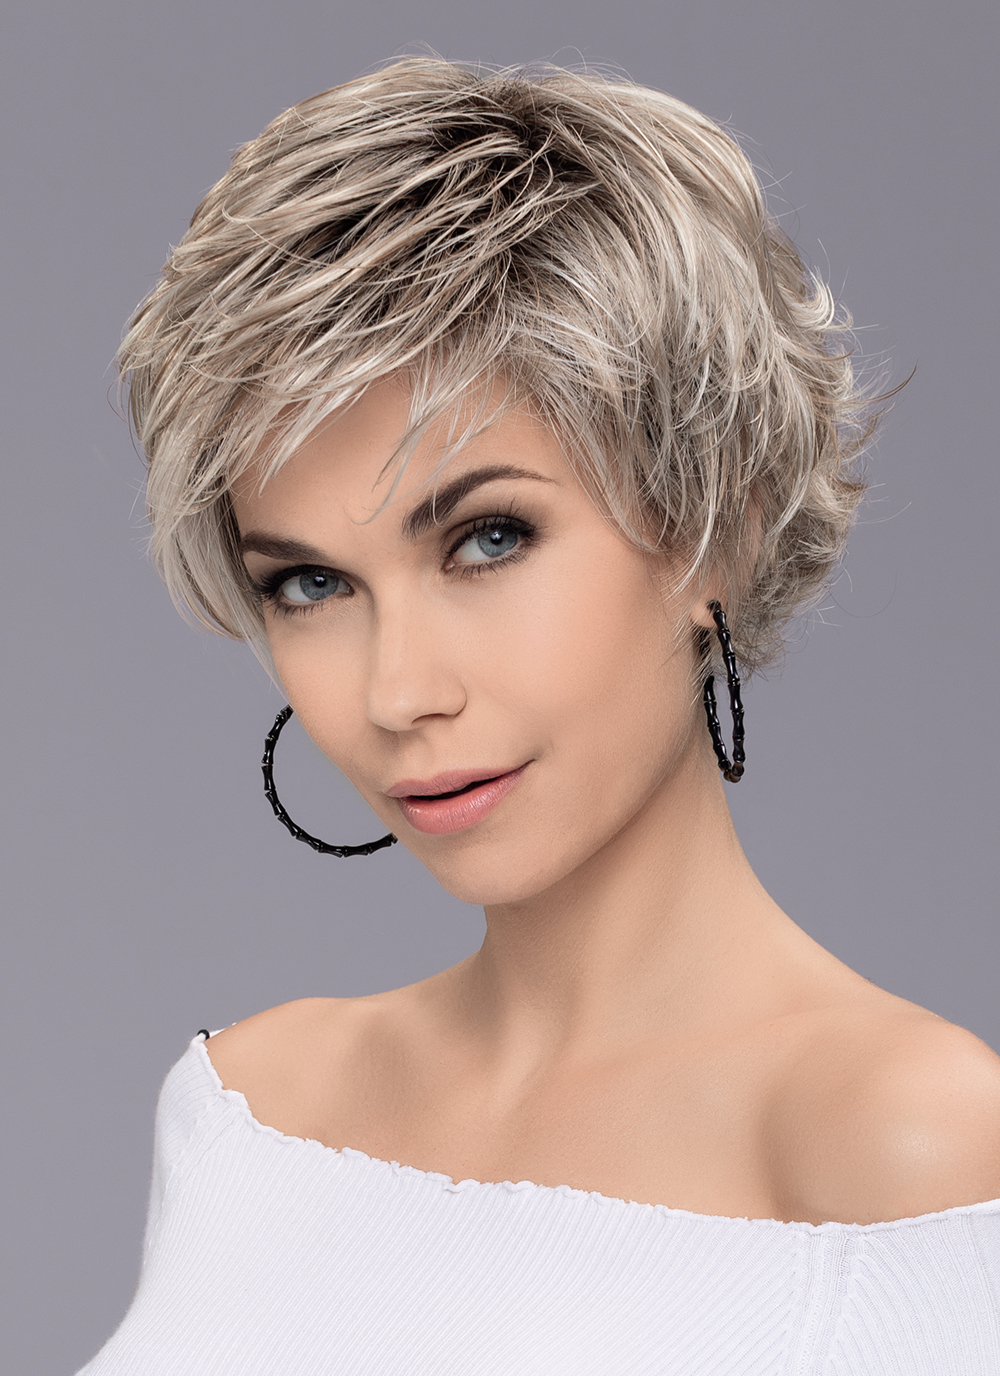 The Raise is a short trendy style with a fringe that sweeps to the side opening up your face